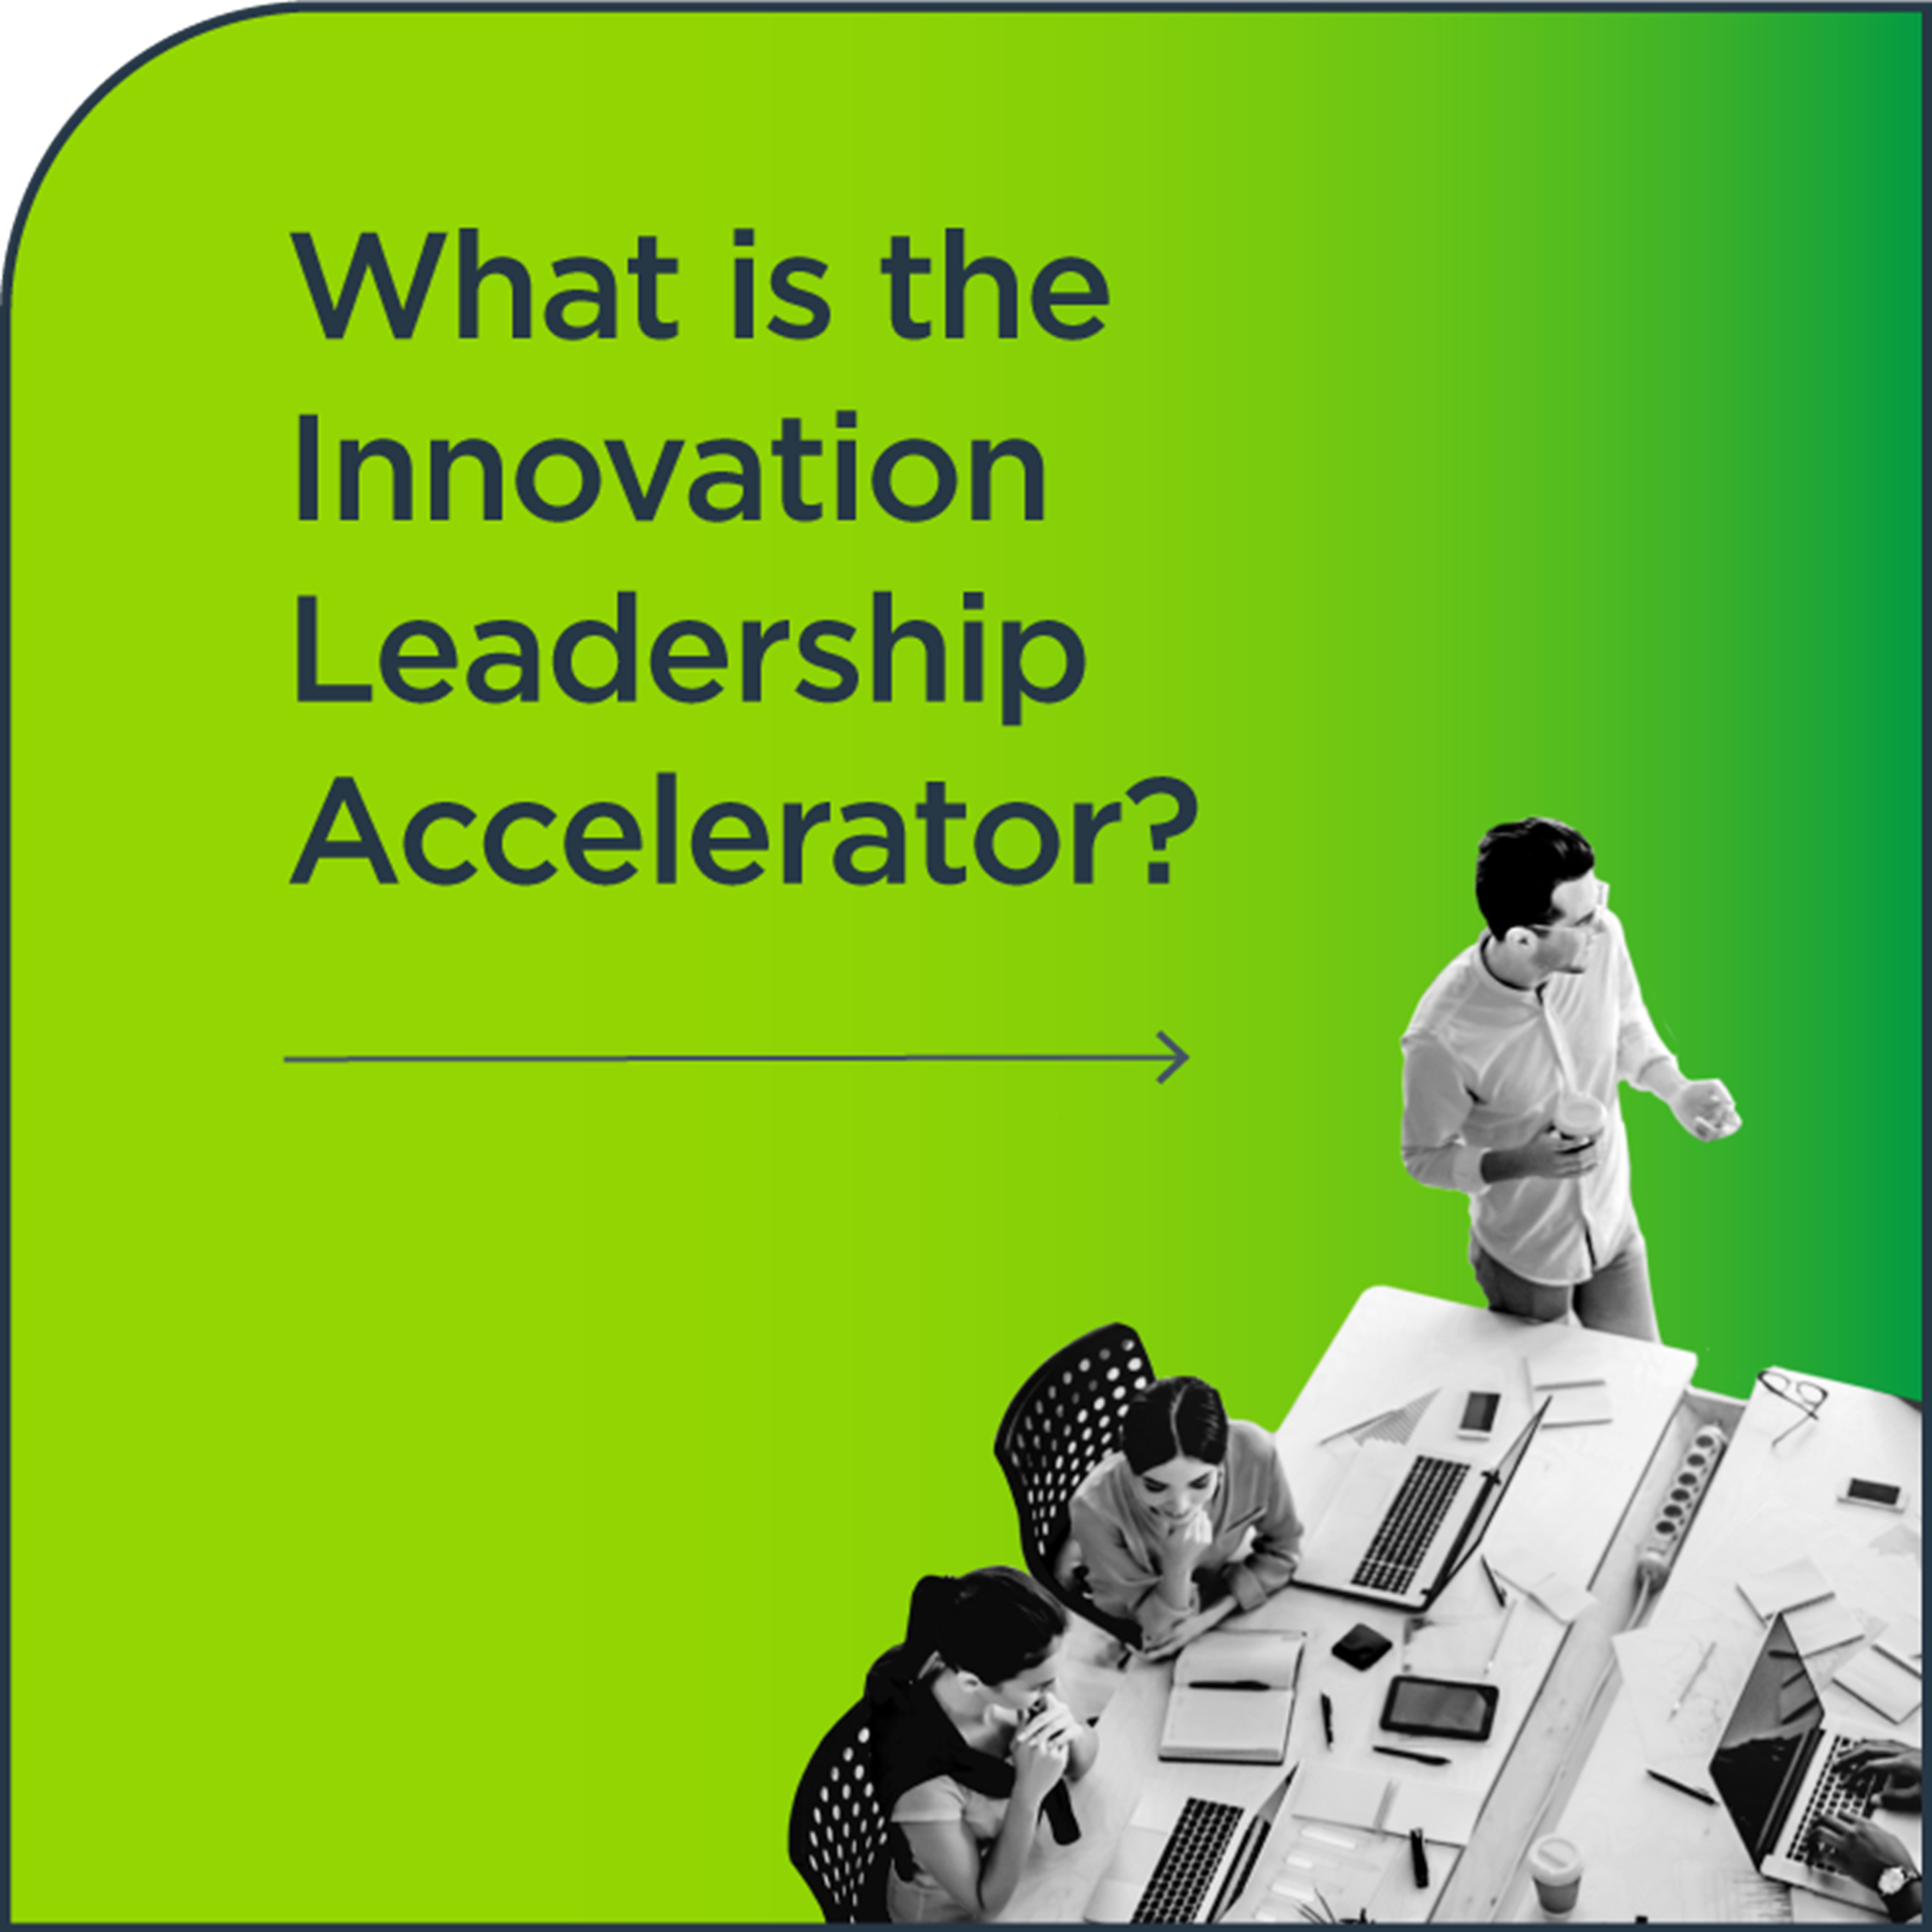 What is the Innovation Leadership Accelerator?